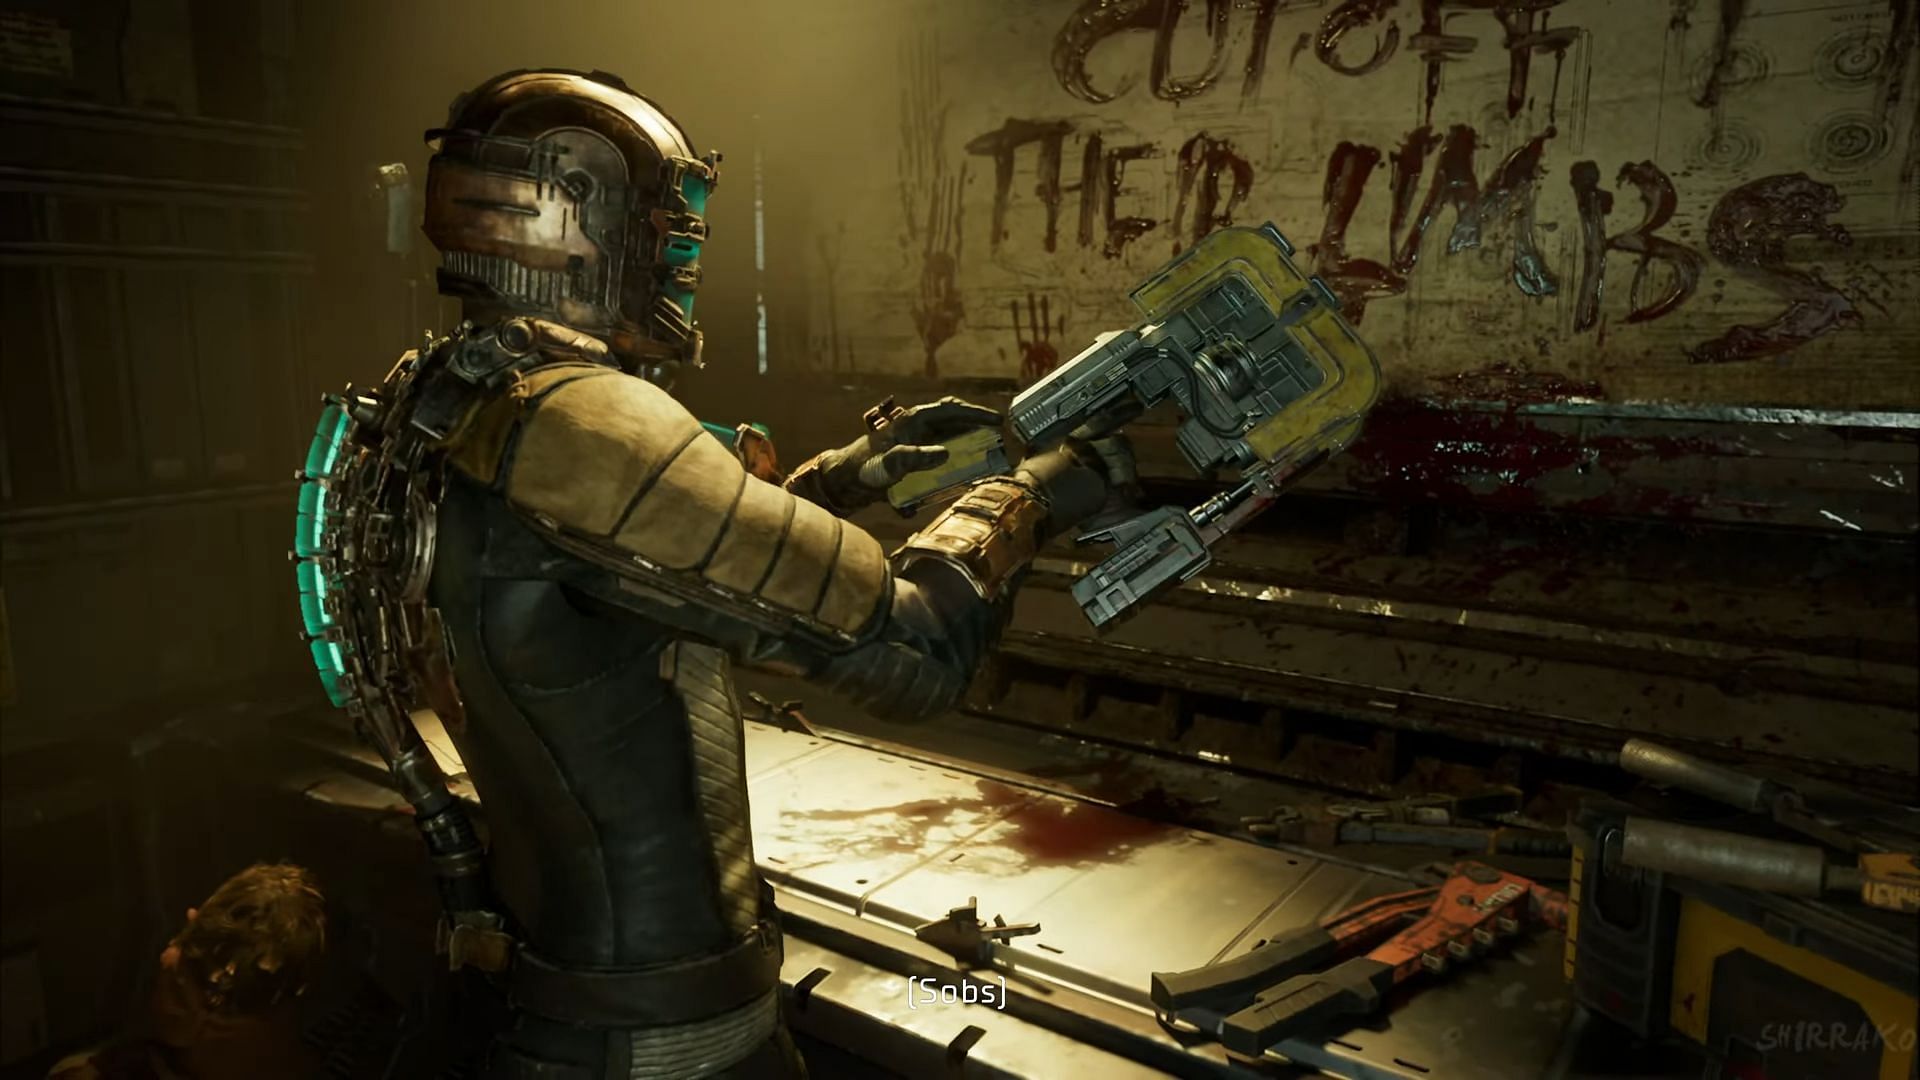 The Dead Space remake provides an arsenal of weapons, but which ones are the best? (Image via YouTube/Shirrako)